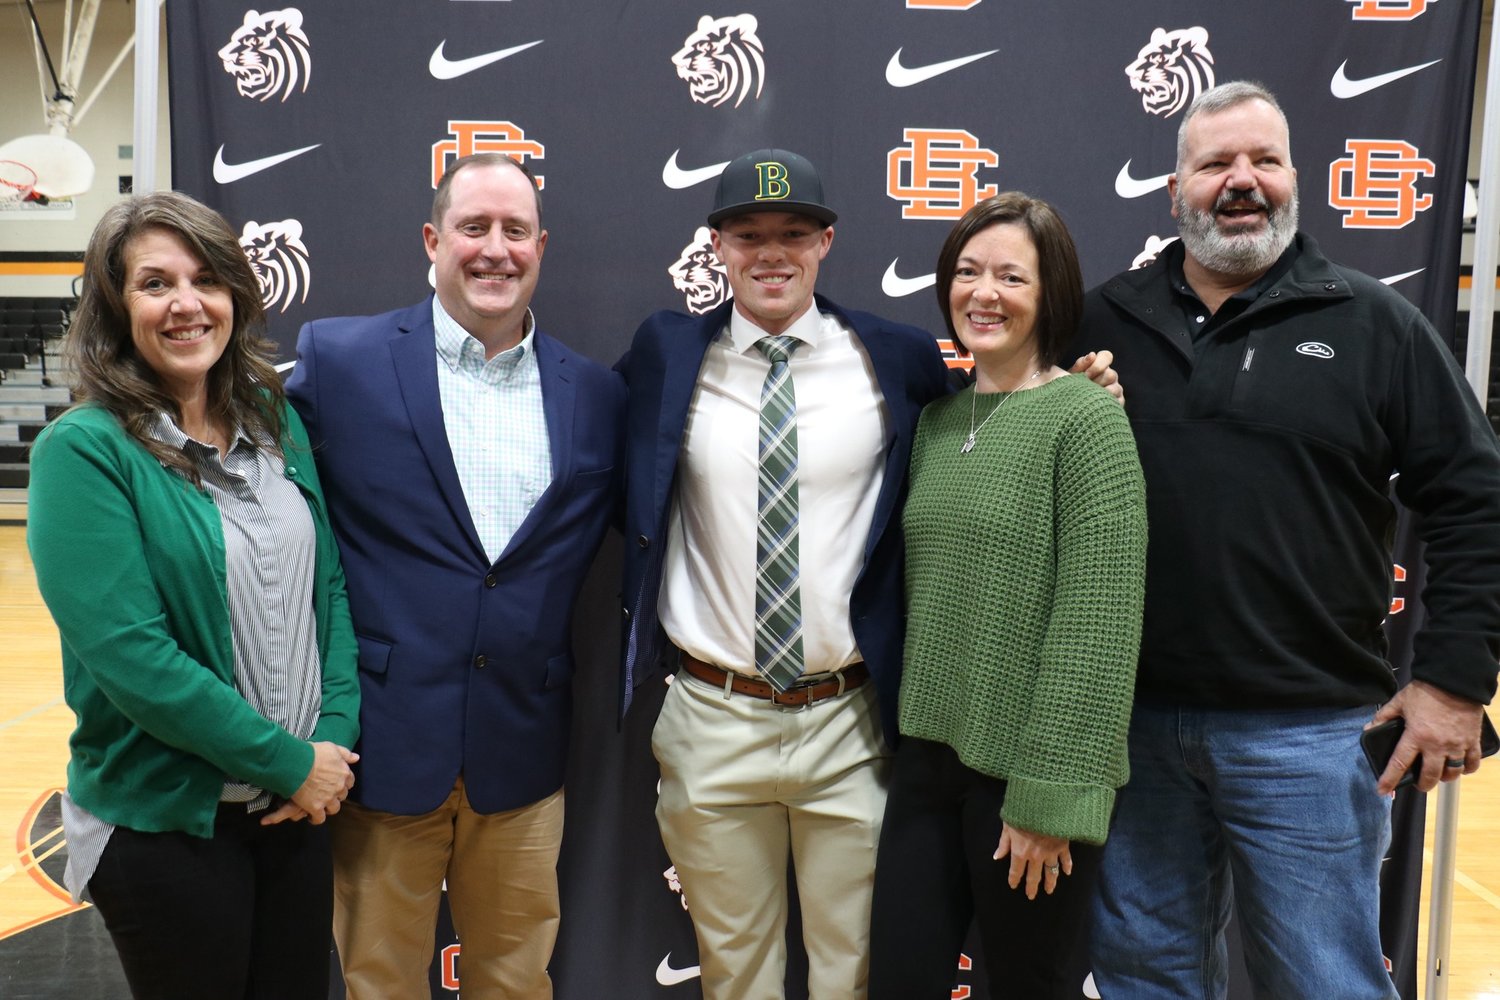 Joining in on the celebration of Trevor Murphy’s signing with Bishop State baseball Thursday, Nov. 17, were his parents, Walt and Casey Murphy and Cheri and Carl Griffith.